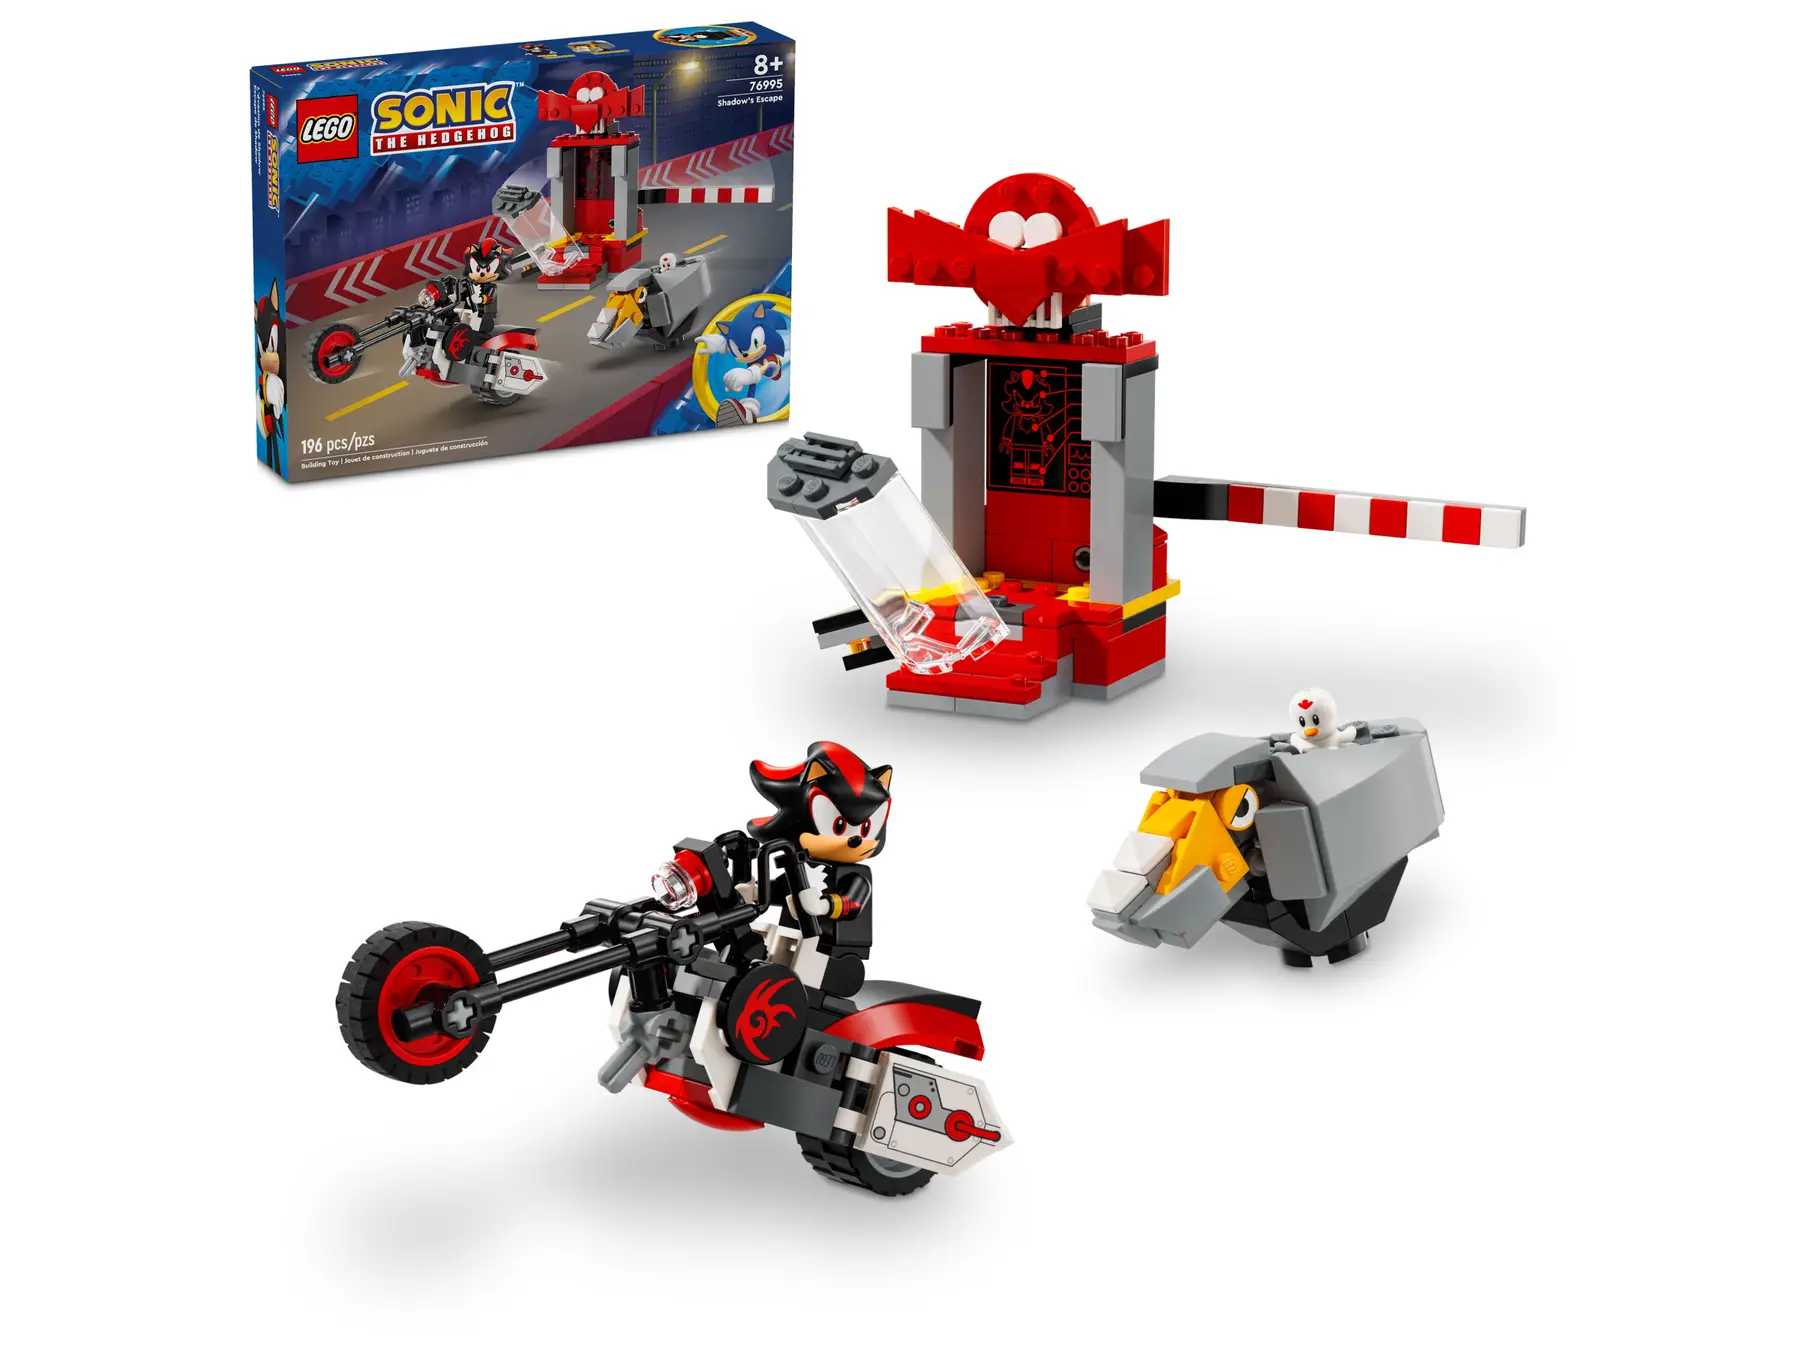 Dr. Eggman officially joins Lego Sonic's second wave of releases